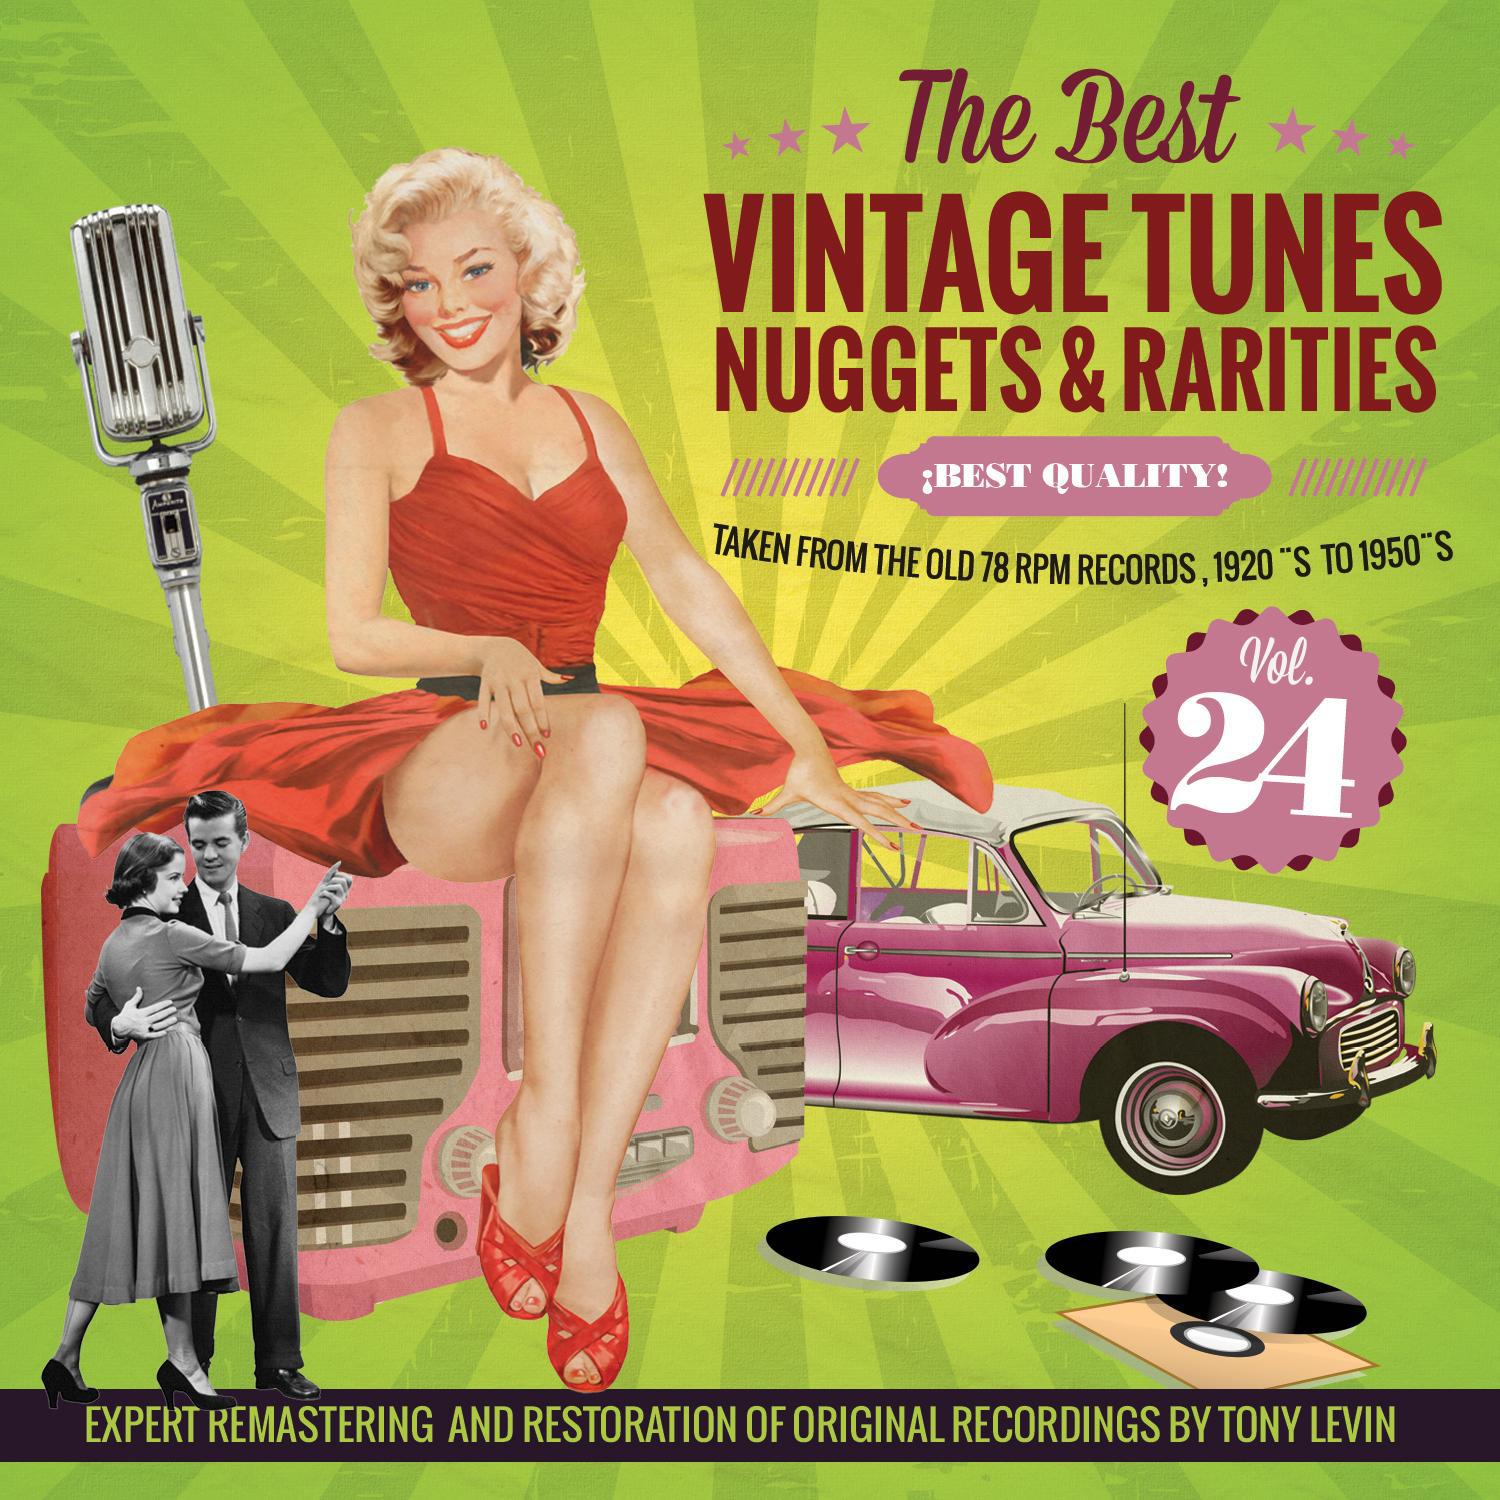 The Best Vintage Tunes. Nuggets  Rarities Best Quality! Vol. 24